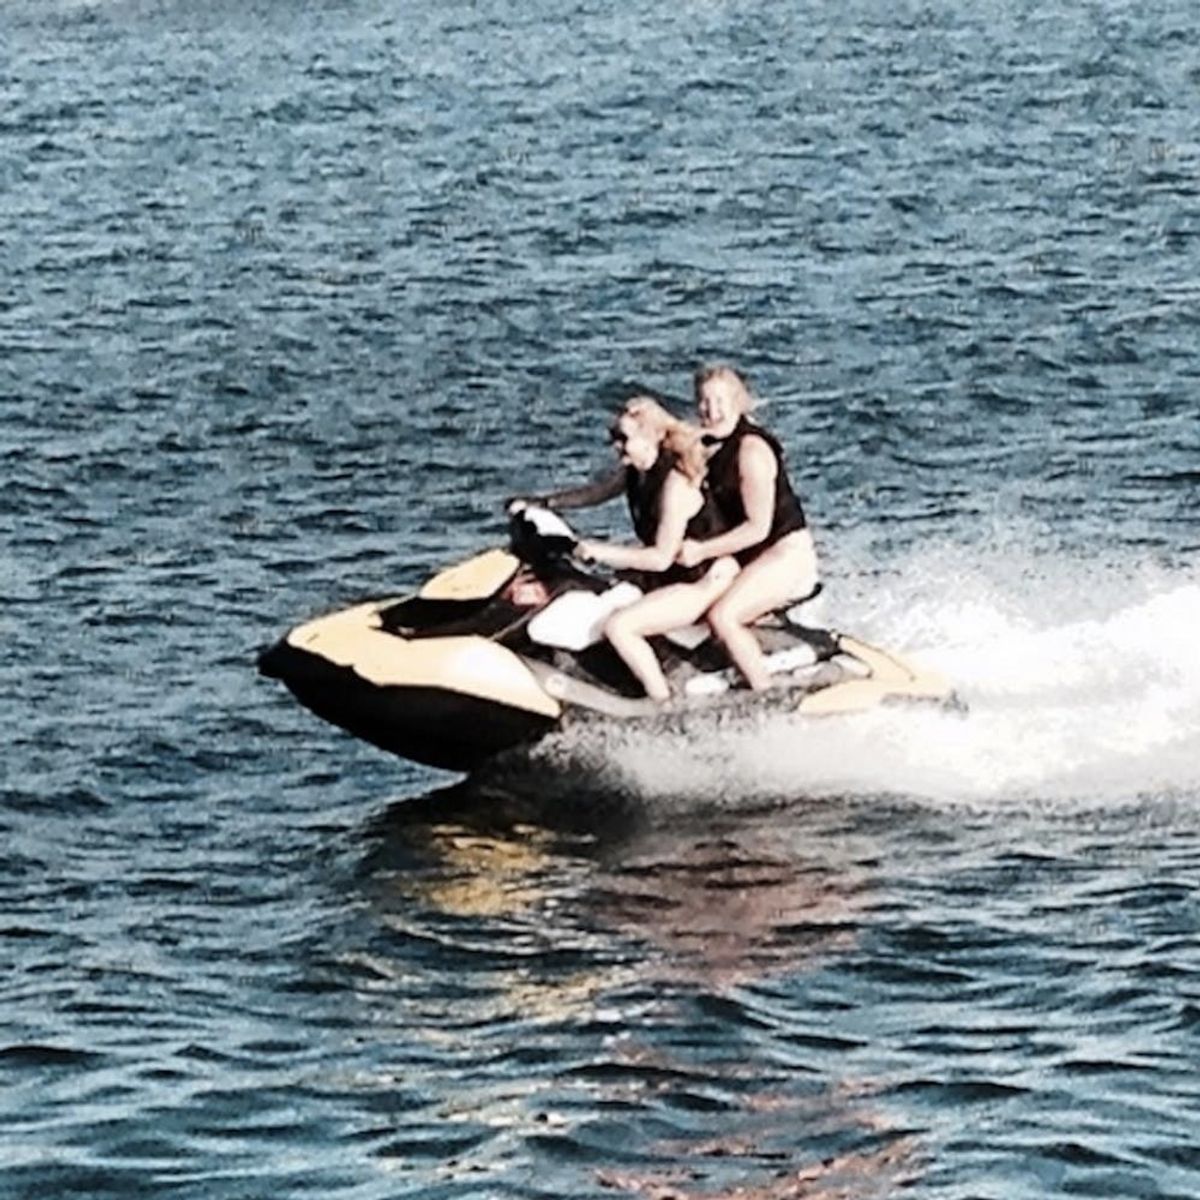 Amy Schumer + JLaw Are on Vacay Together and the Pics Are Epic